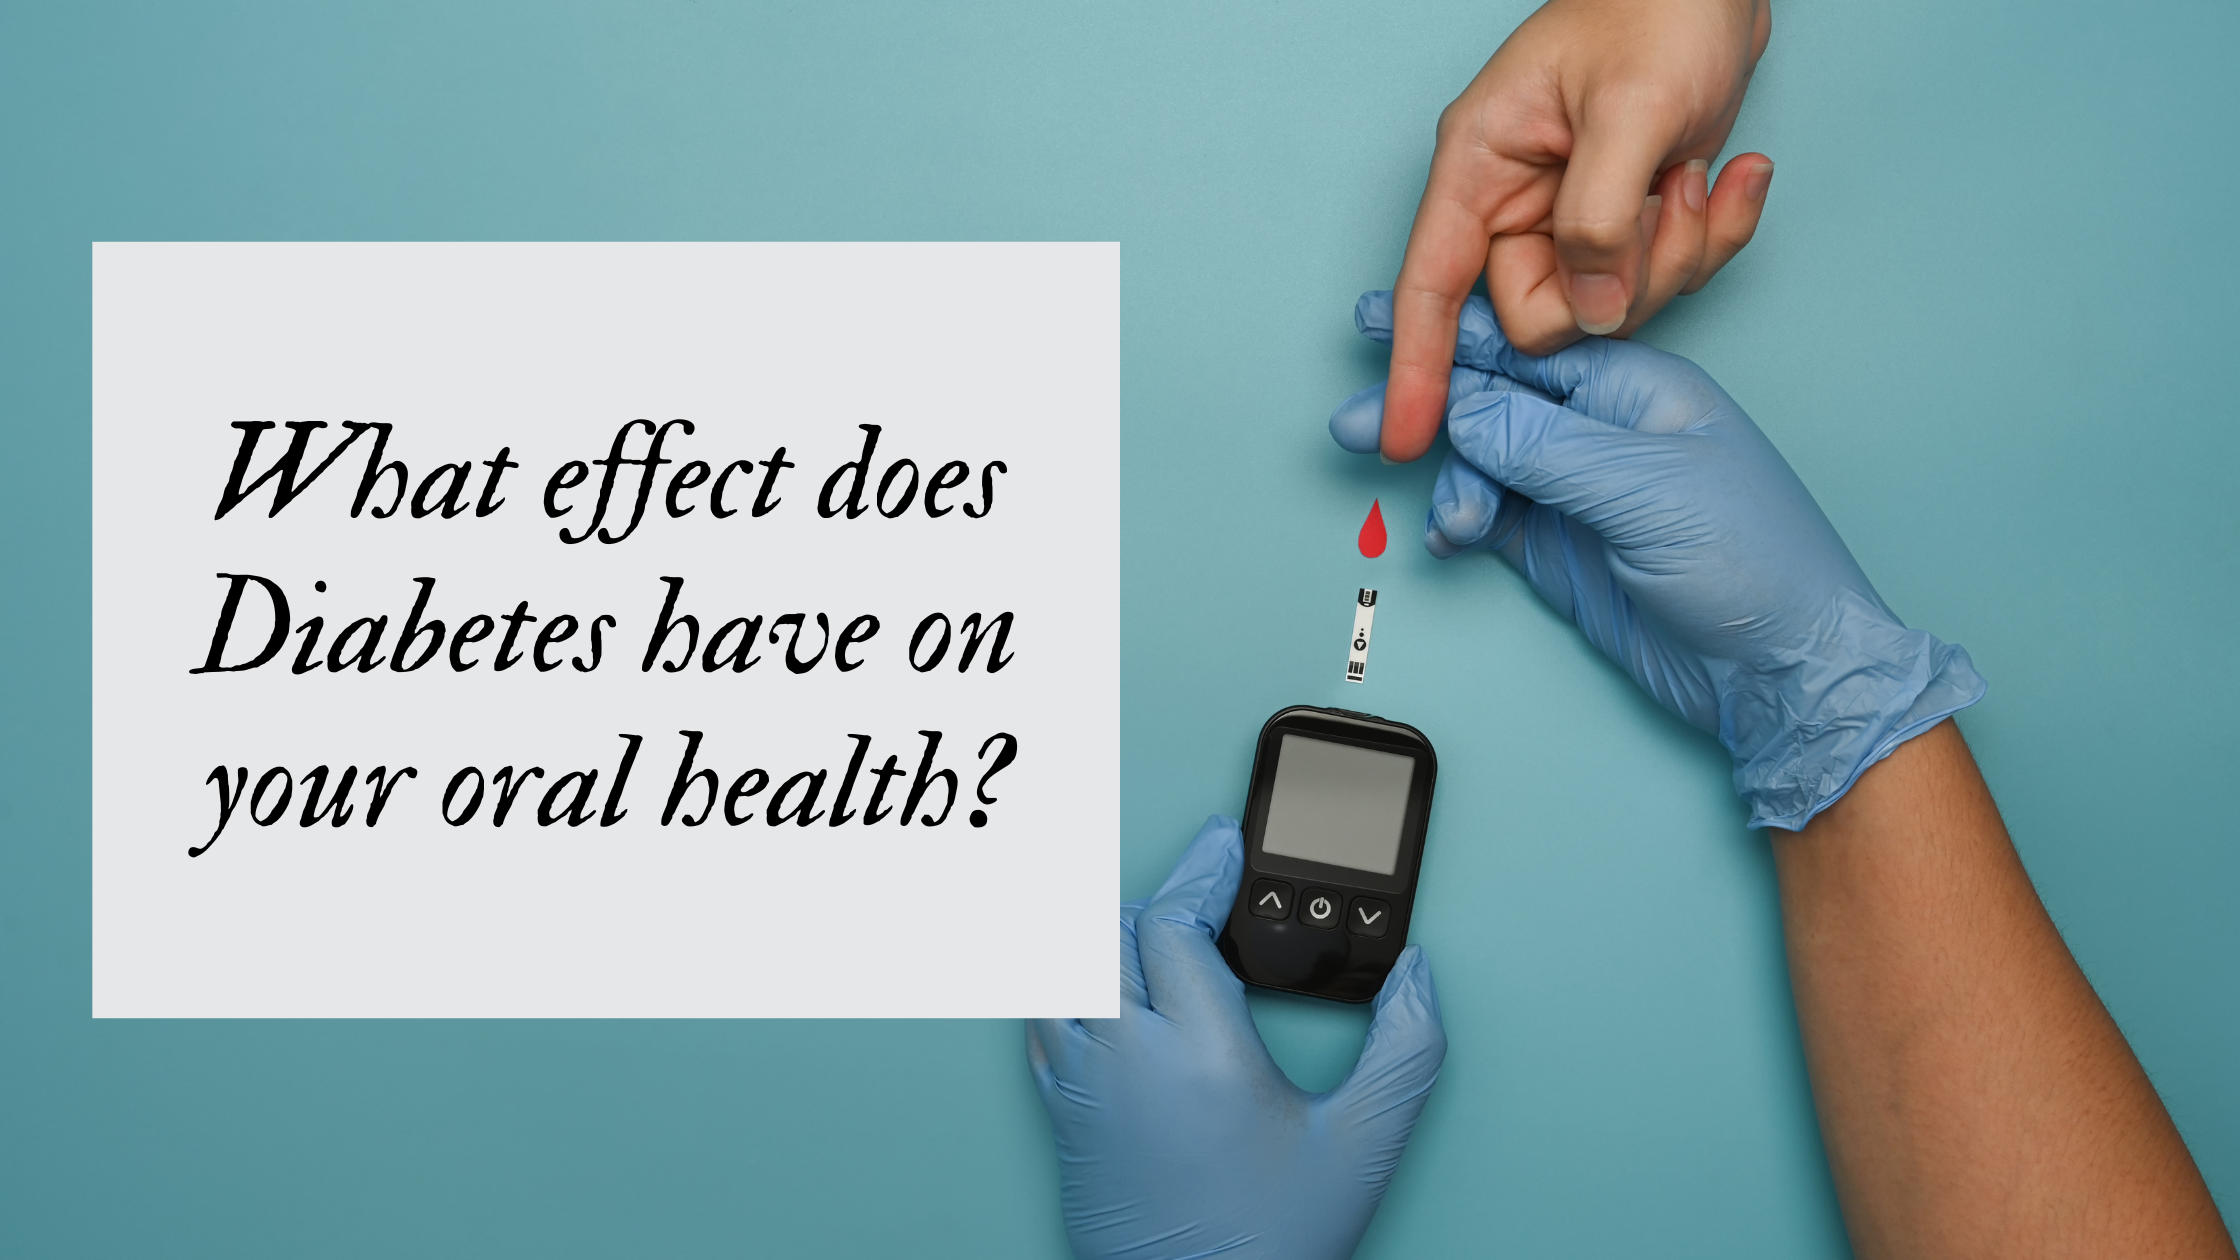 What effect does Diabetes have on your oral health